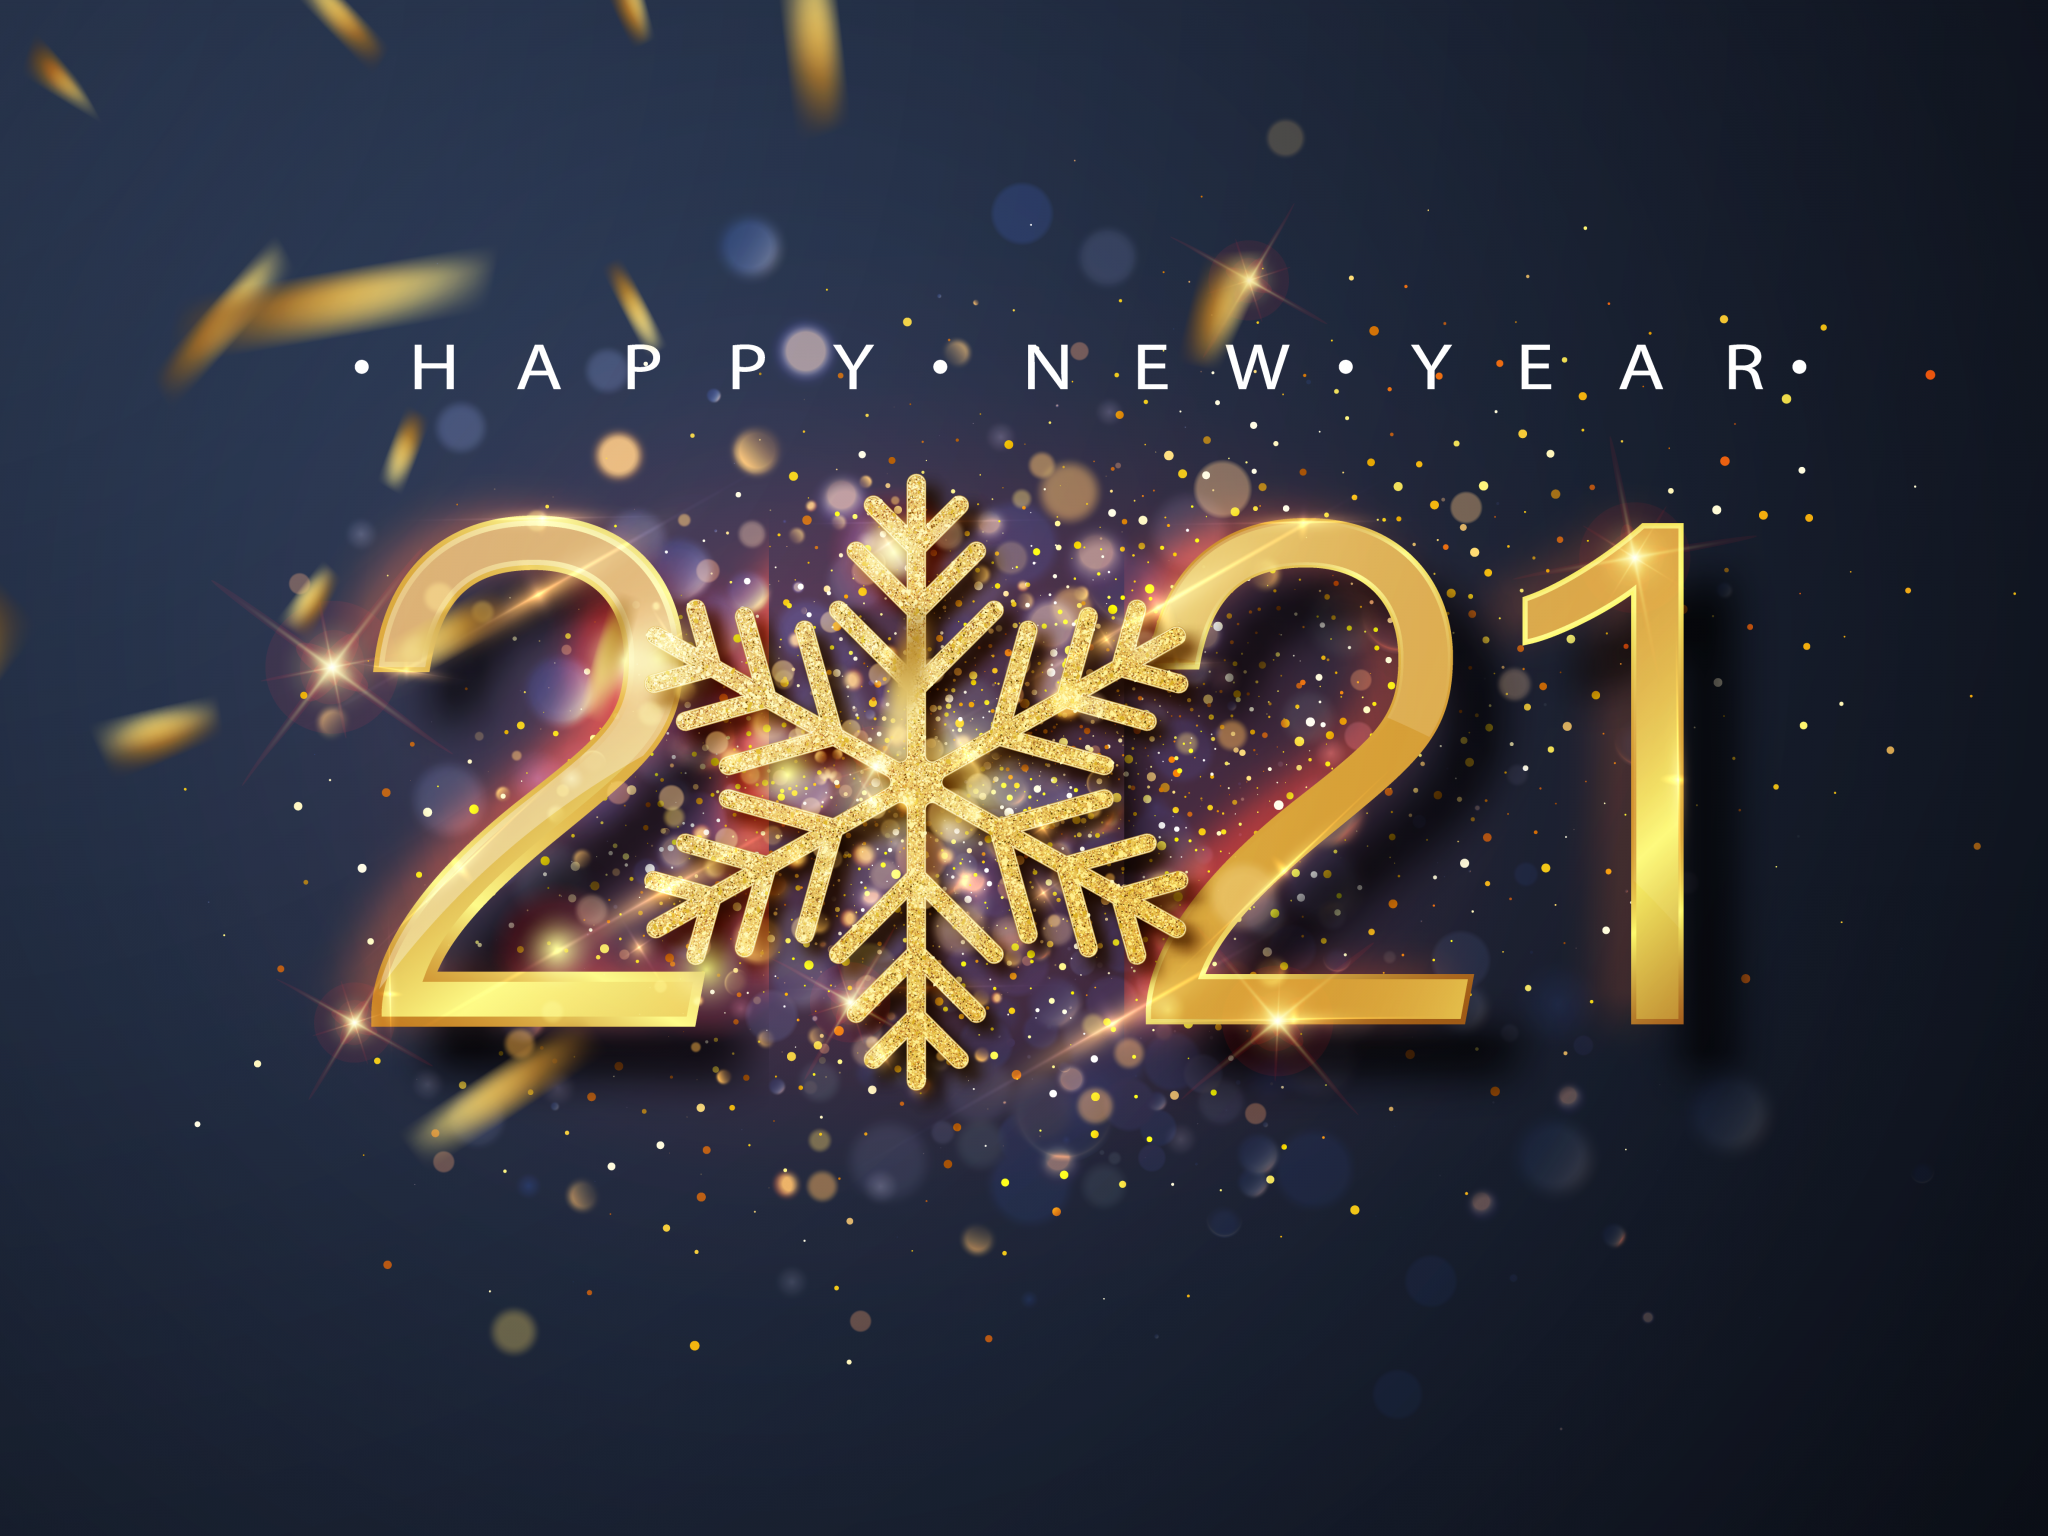 New Year 4K Wallpaper, Happy New Year, Golden Letters, Sparkles, Celebrations New Year